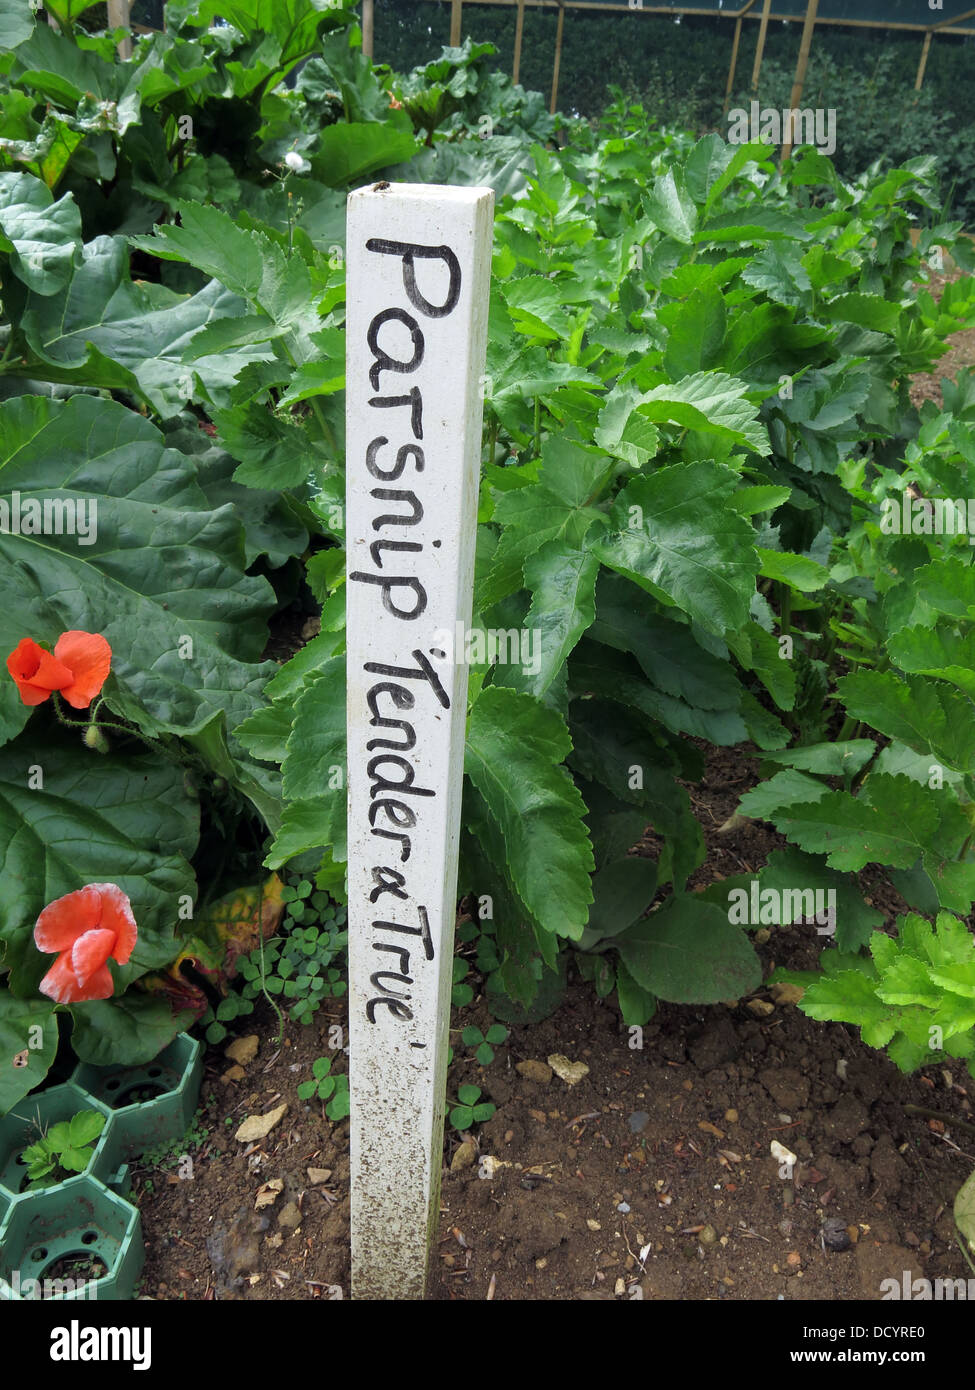 Parsnip, Tender & True ,plants and stake with name Stock Photo